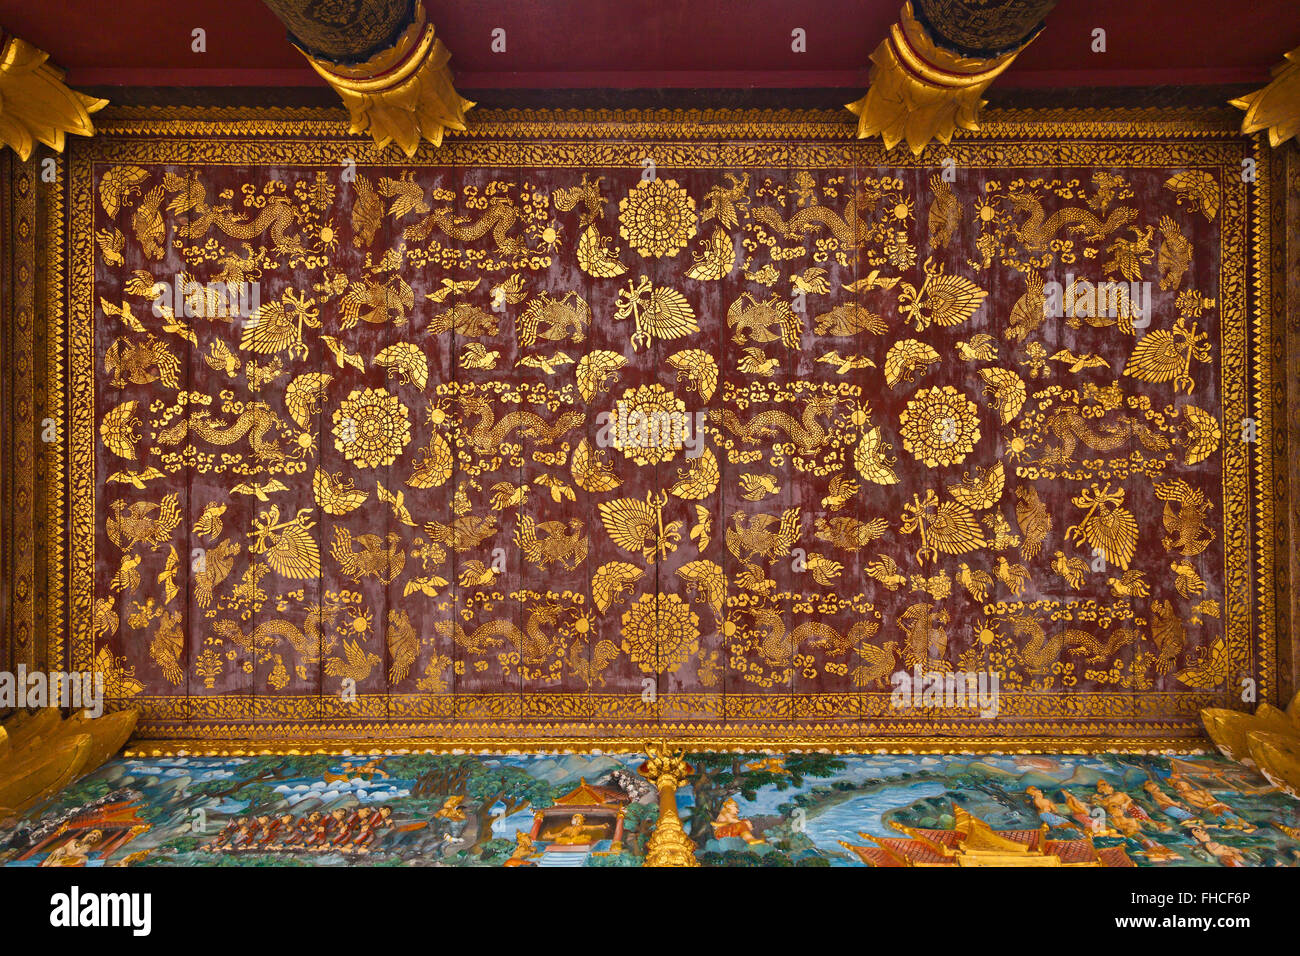 Stenciled DRAGON & PHOENIX ceiling designs on a BUDDHIST TEMPLE  - LUANG PRABANG, LAOS Stock Photo